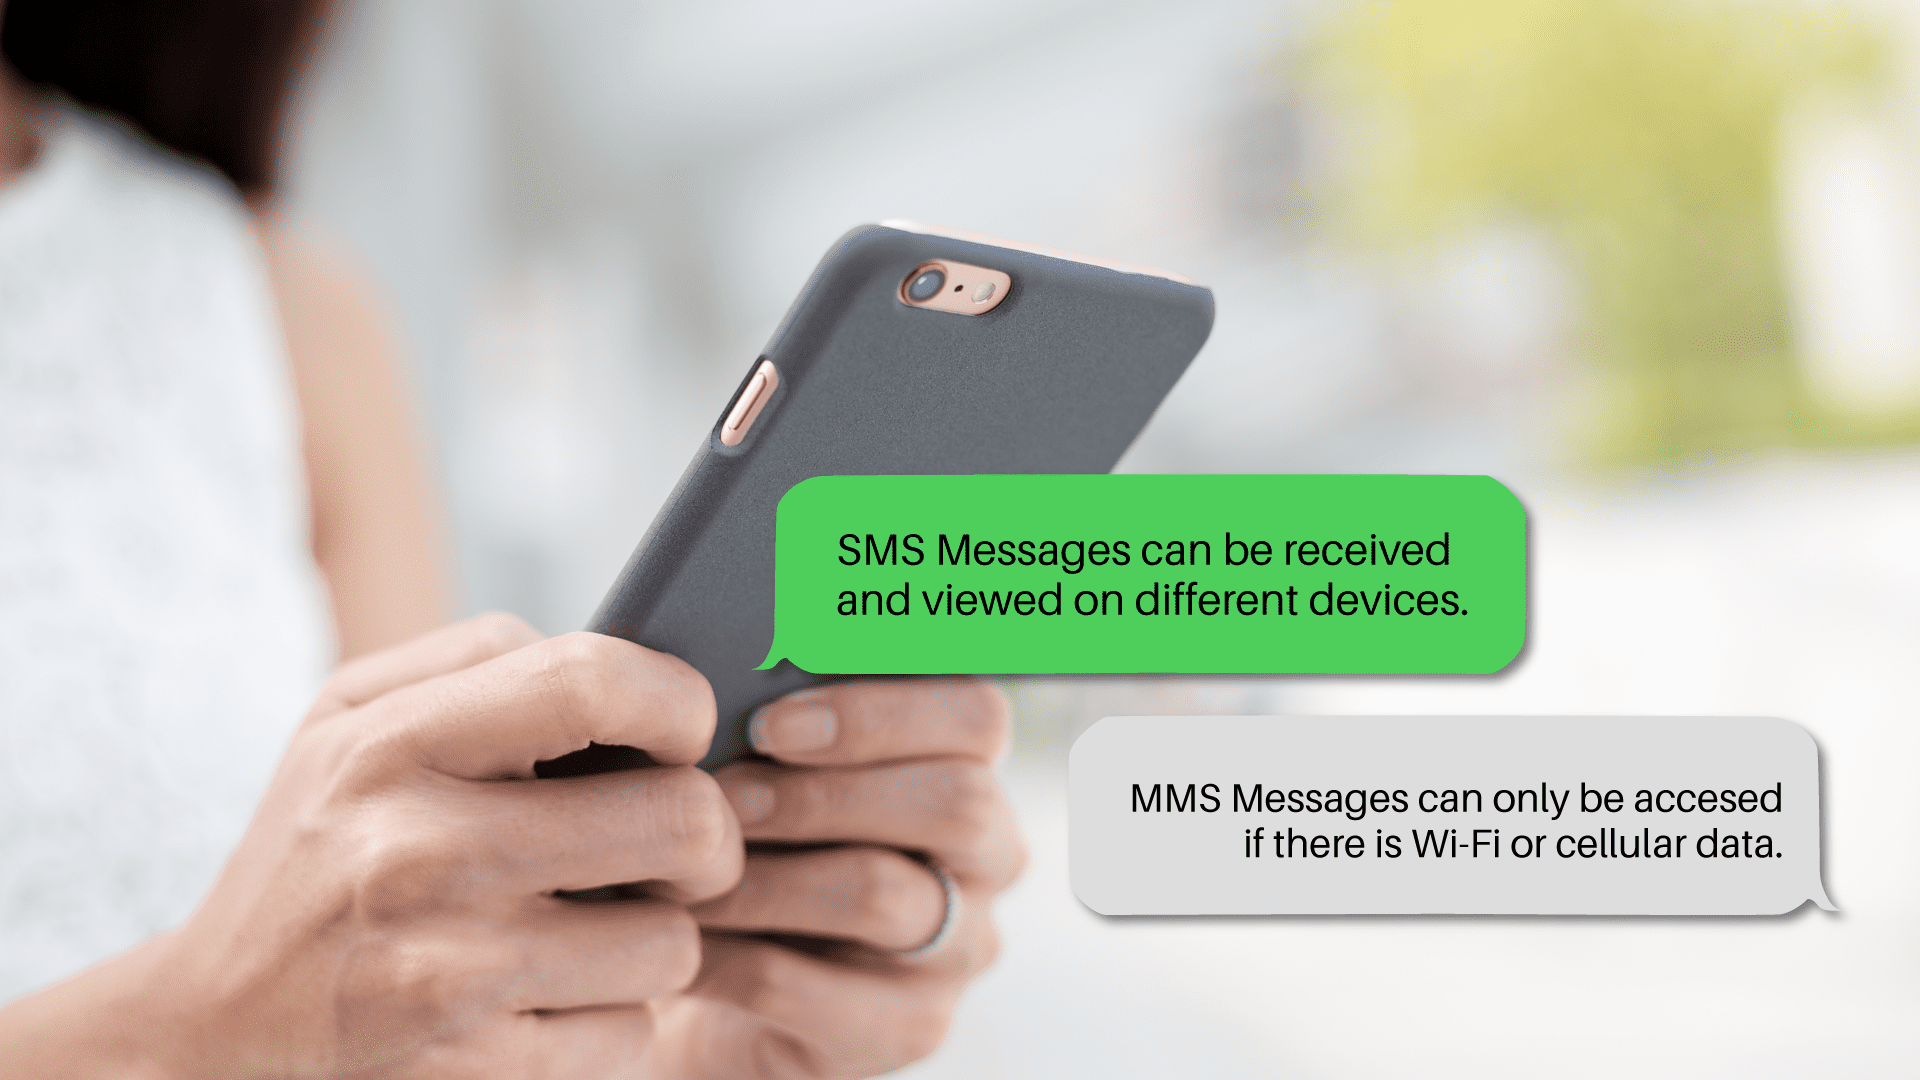 mms vs sms, sms messages, multimedia messaging service, mms messages, short message service